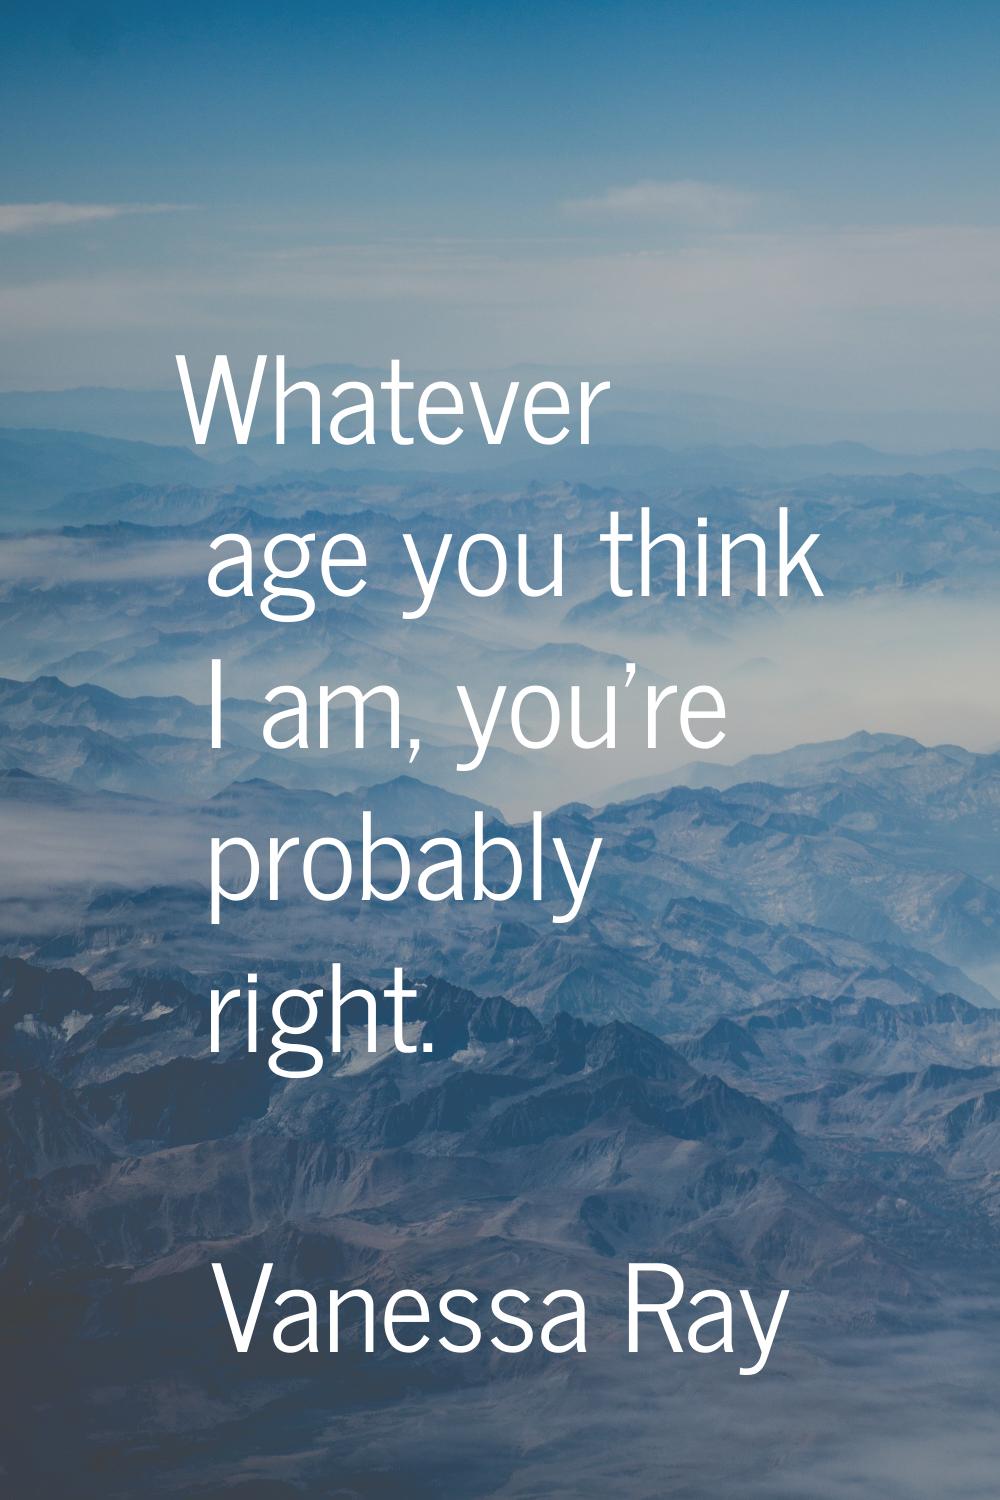 Whatever age you think I am, you're probably right.